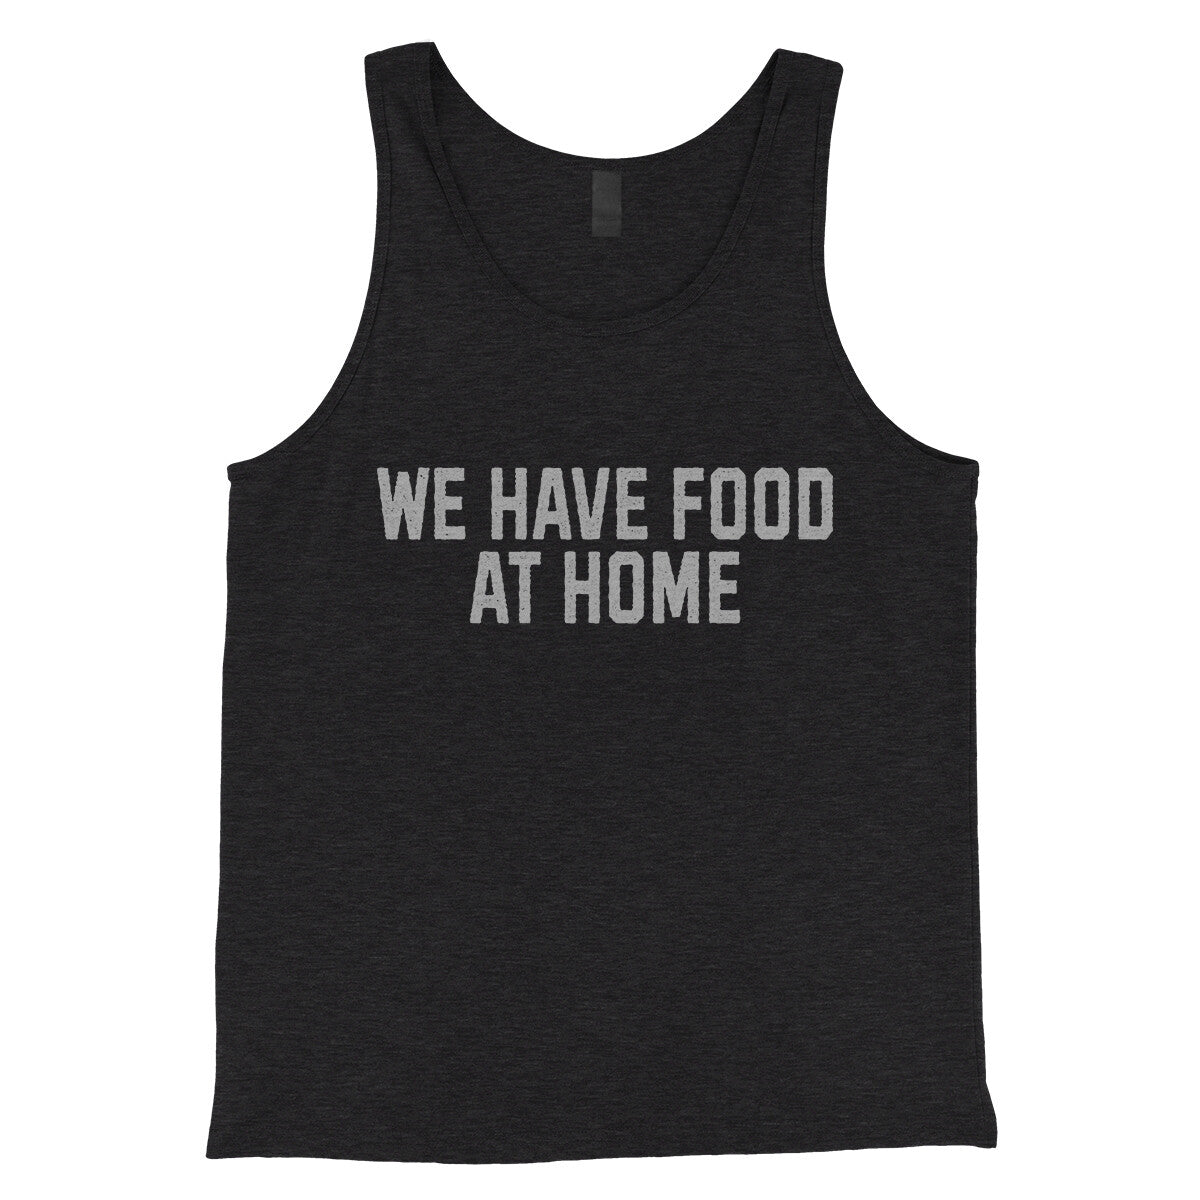 We Have Food at Home in Charcoal Black TriBlend Color